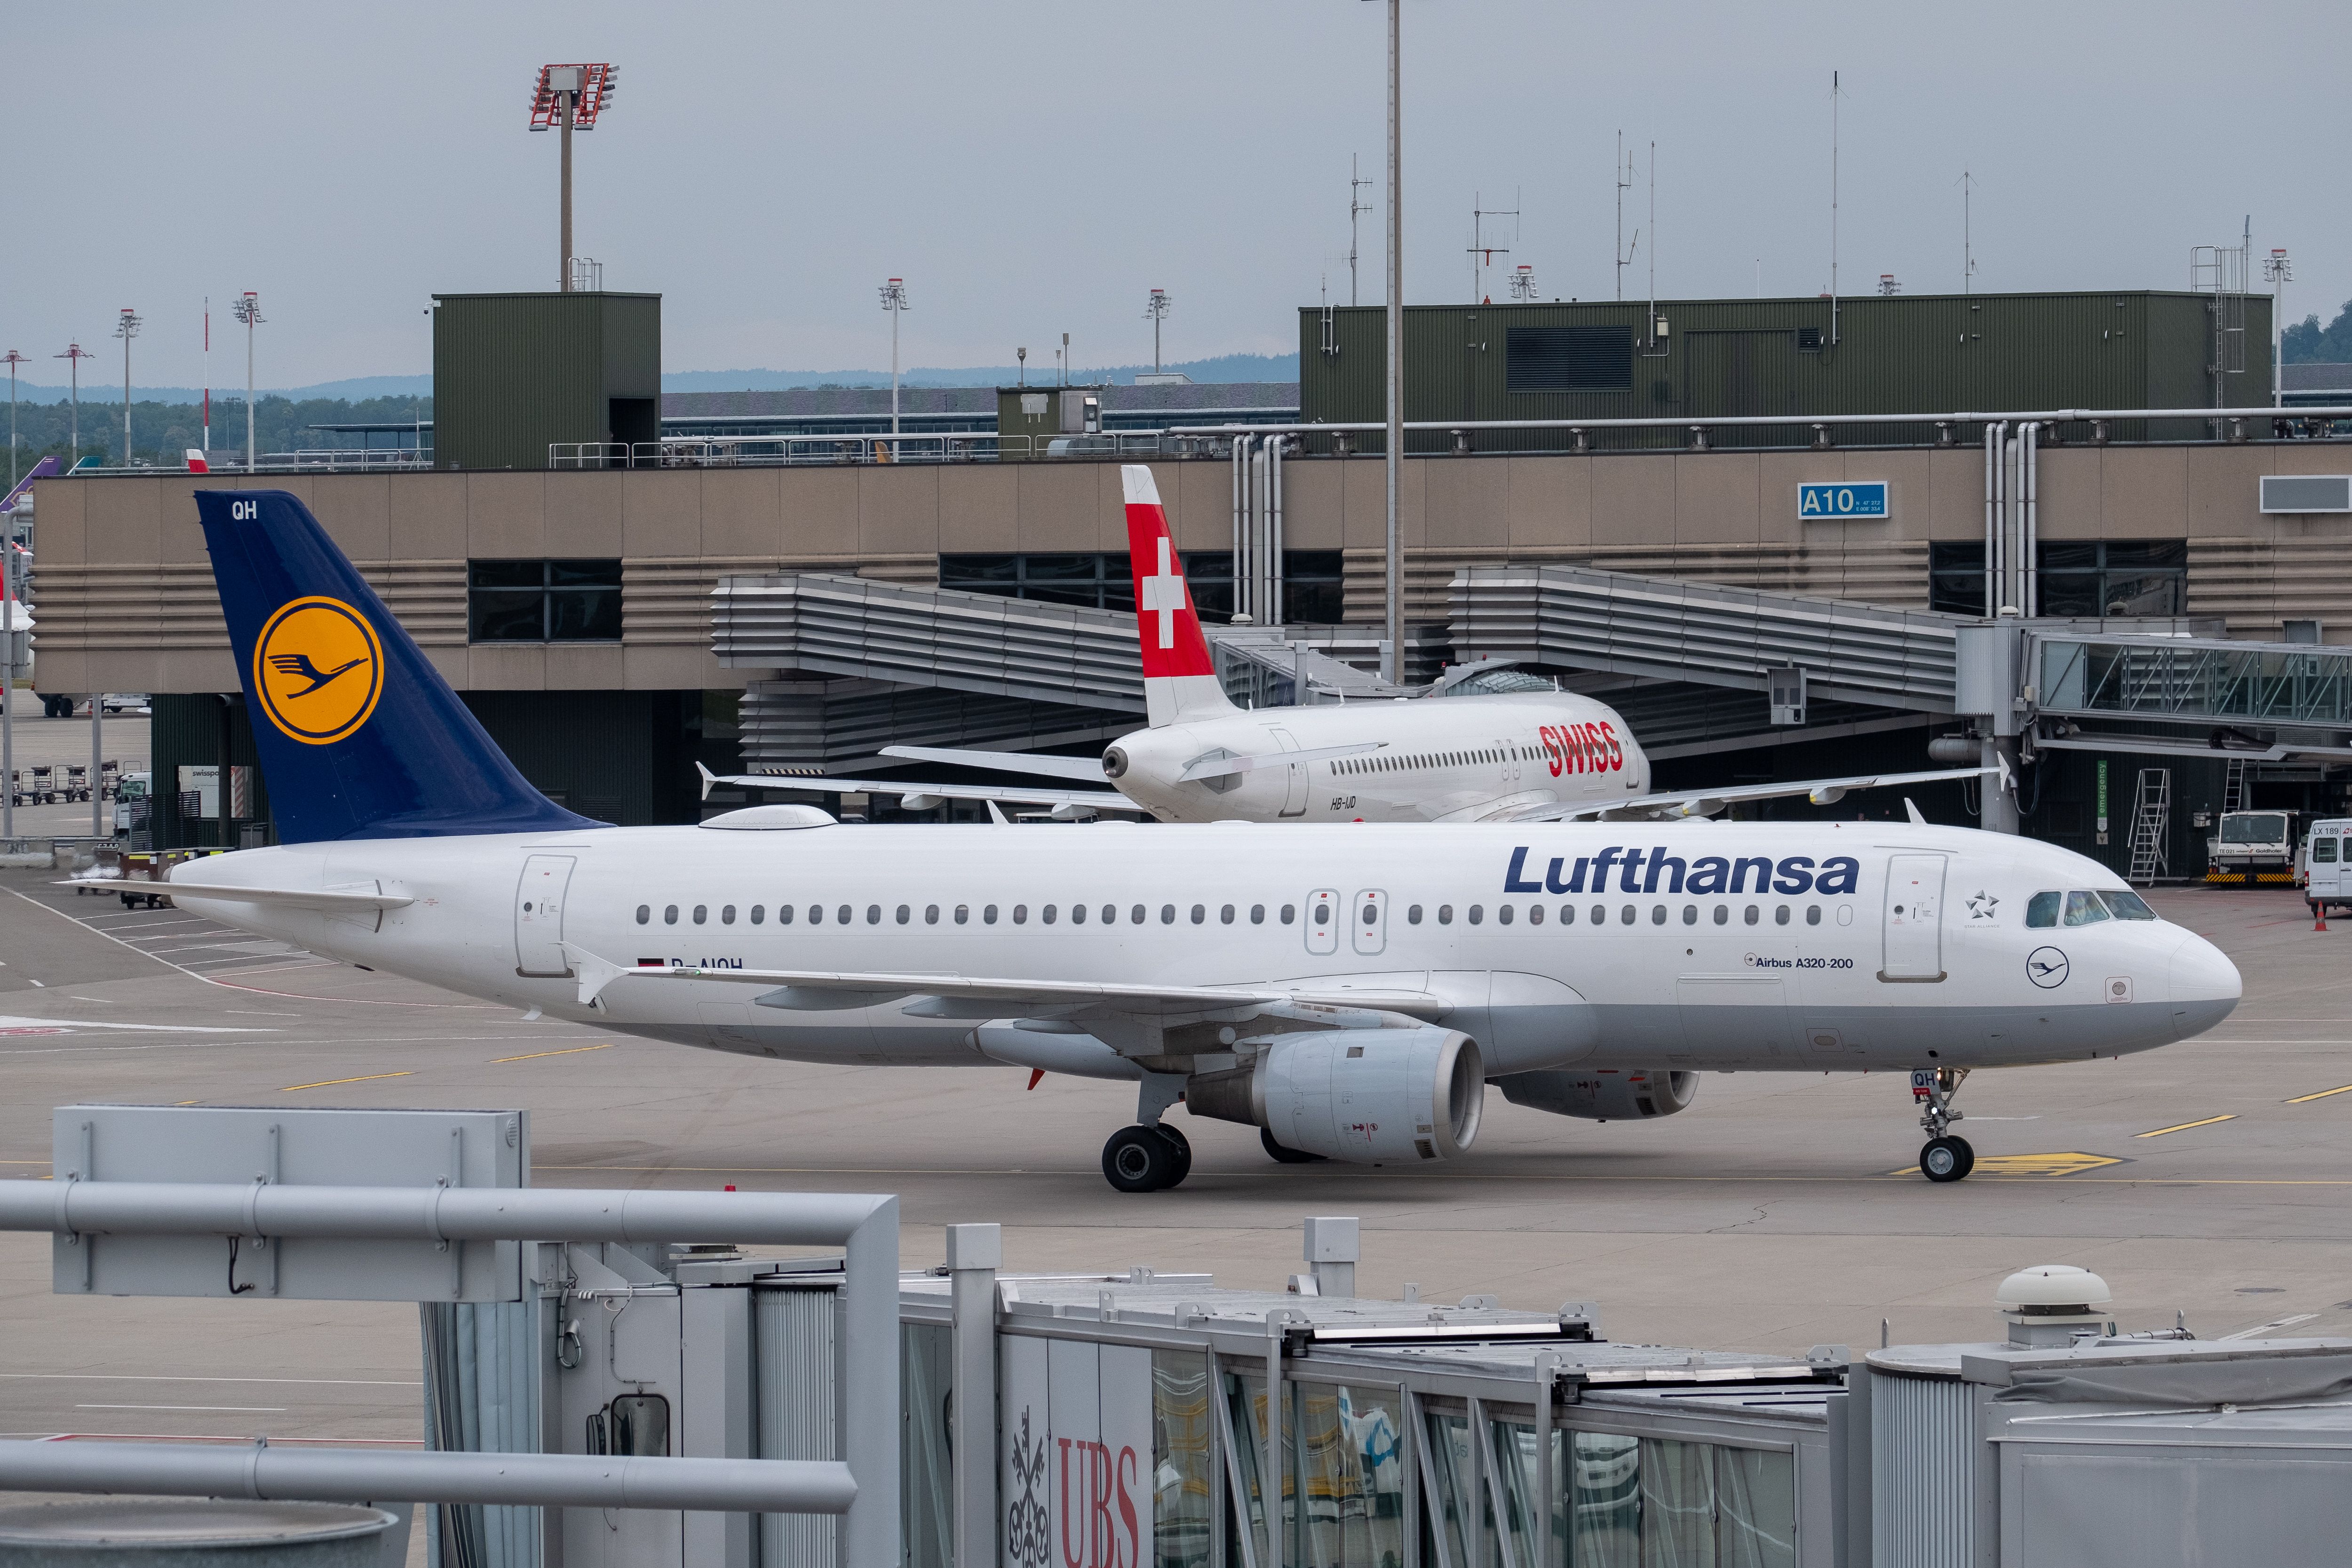 A Lufthansa aircraft taxiing in front of a SWISS aircraft parked at an airport gate.